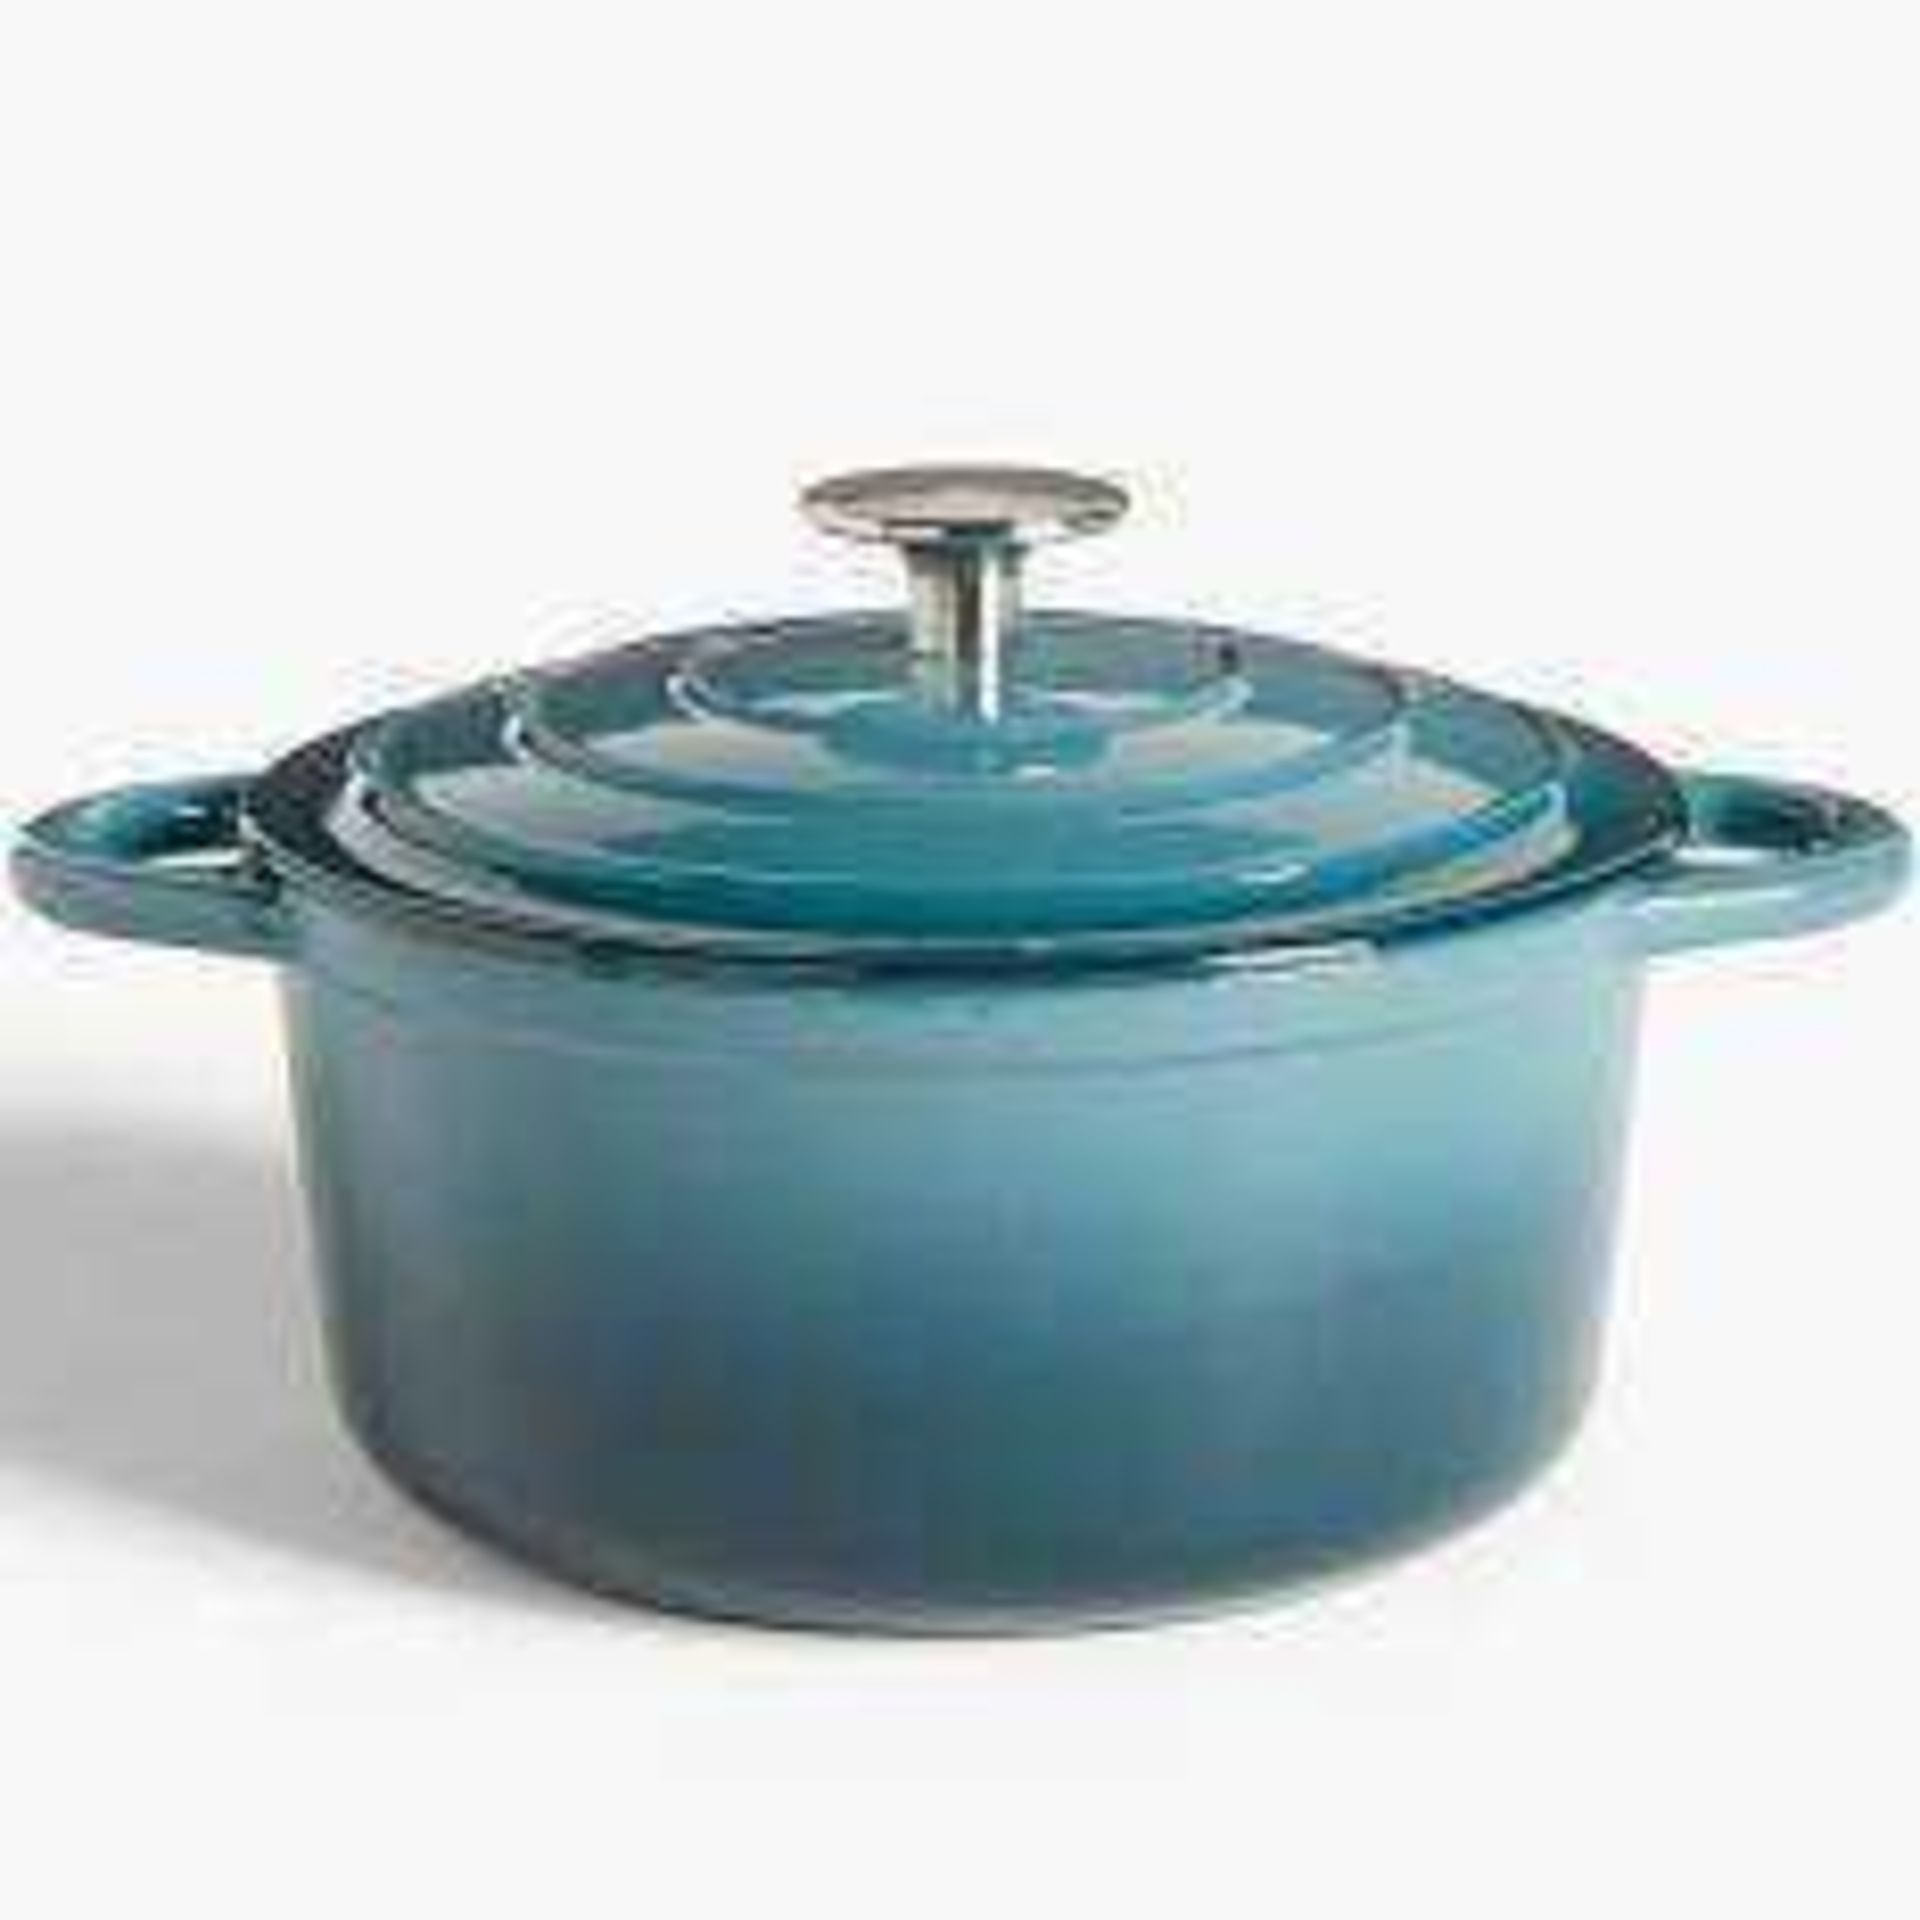 Combined RRP £185 Lot To Contain Three Boxed John Lewis Cast Iron Casserole Dishes With Lids In Size - Image 3 of 3